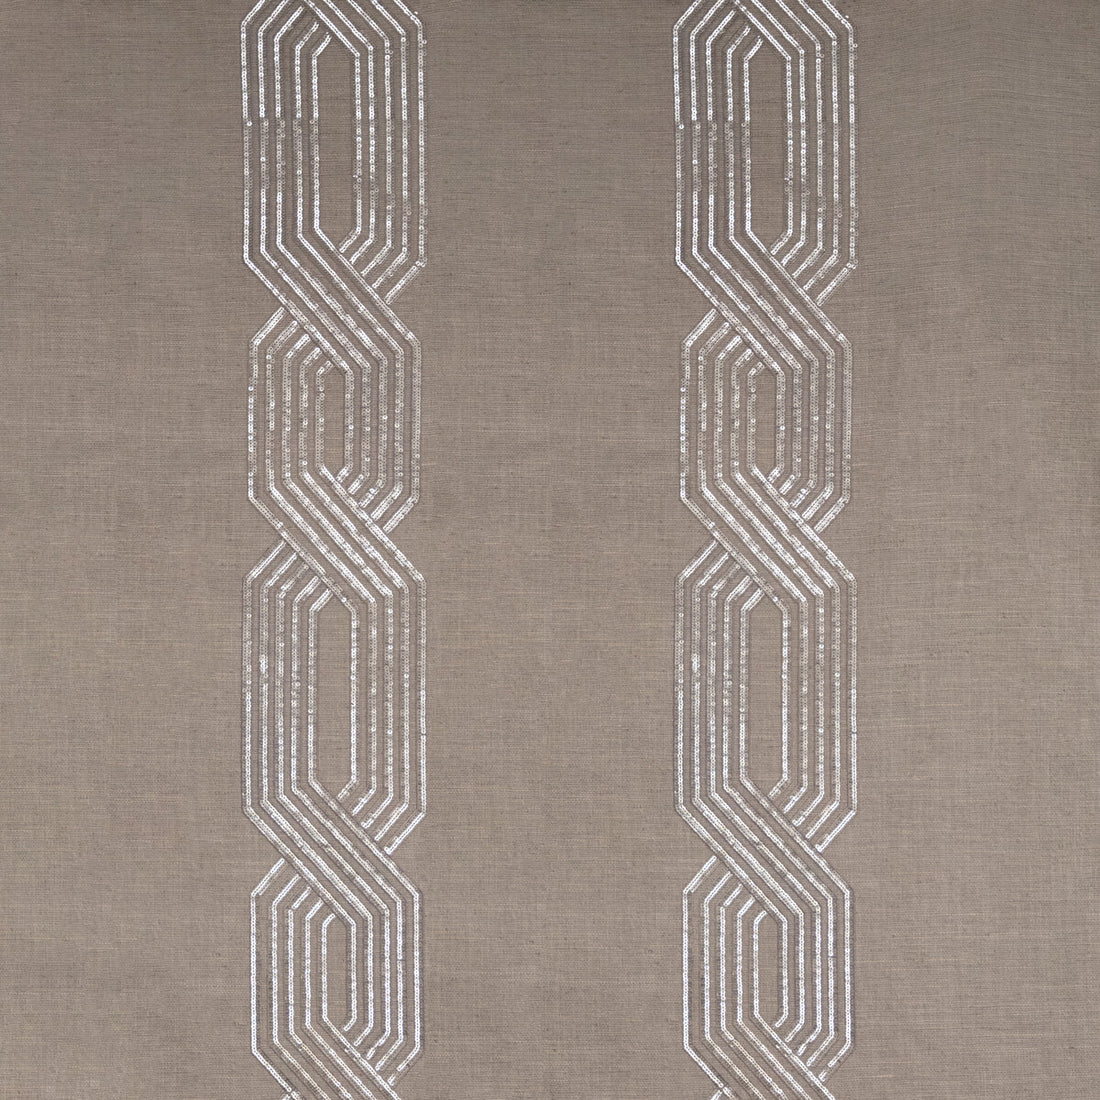 Metalwork fabric in vapor color - pattern 4792.113.0 - by Kravet Couture in the Windsor Smith Naila collection